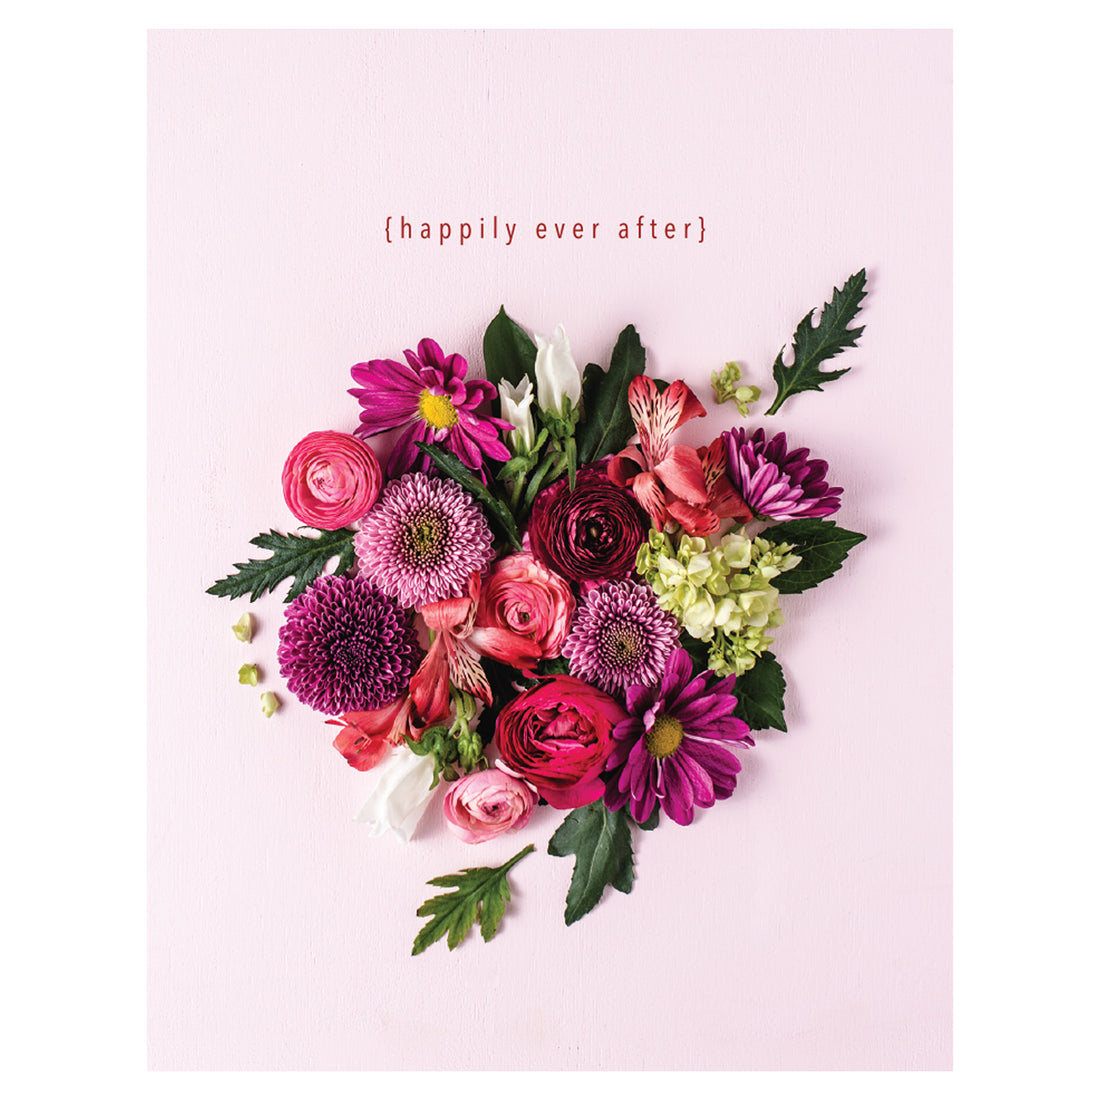 A beautifully designed arrangement of flowers captured in a stunning photograph that would make for an ideal Hester &amp; Cook Happily Ever After Card.